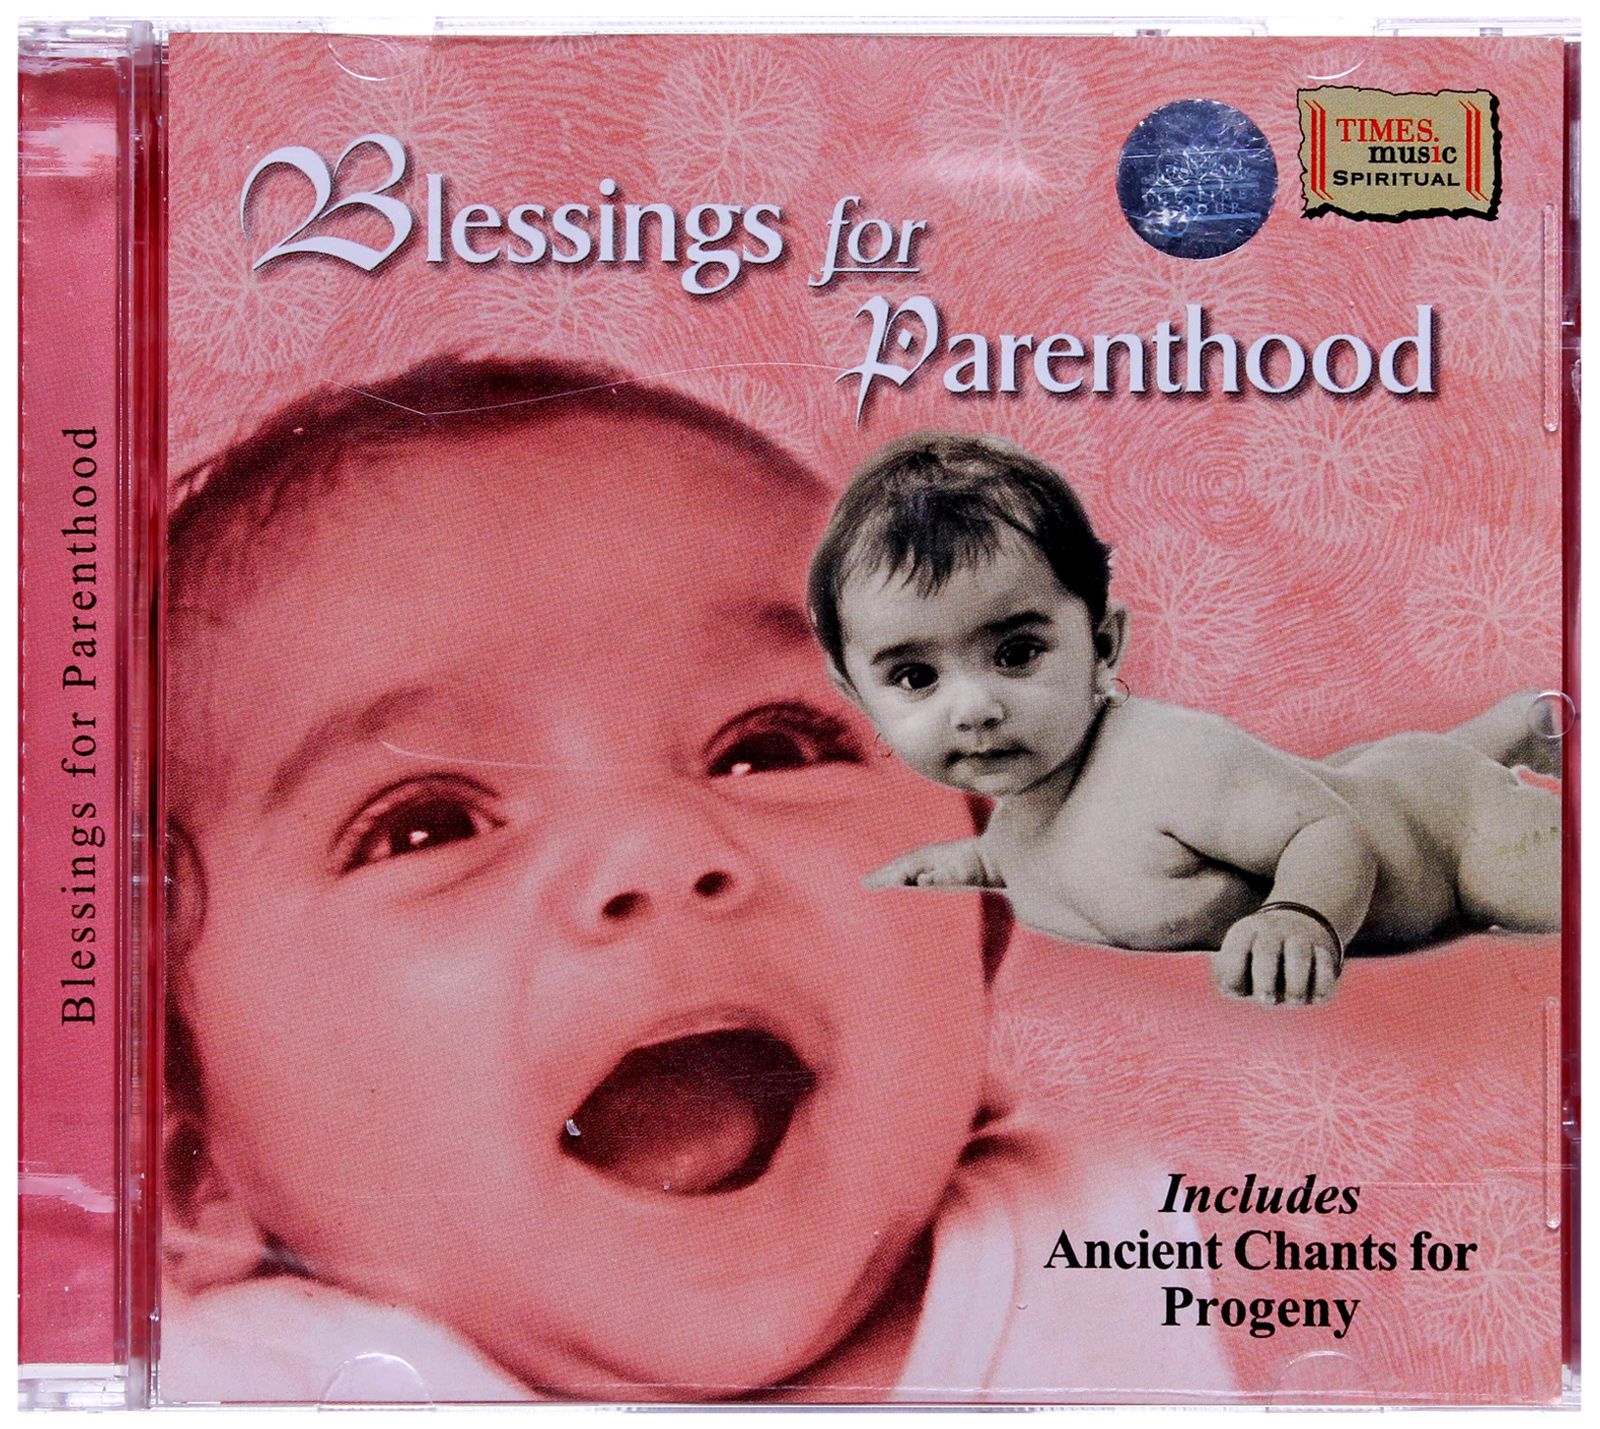 Times Music - Blessings For Parenthood CD